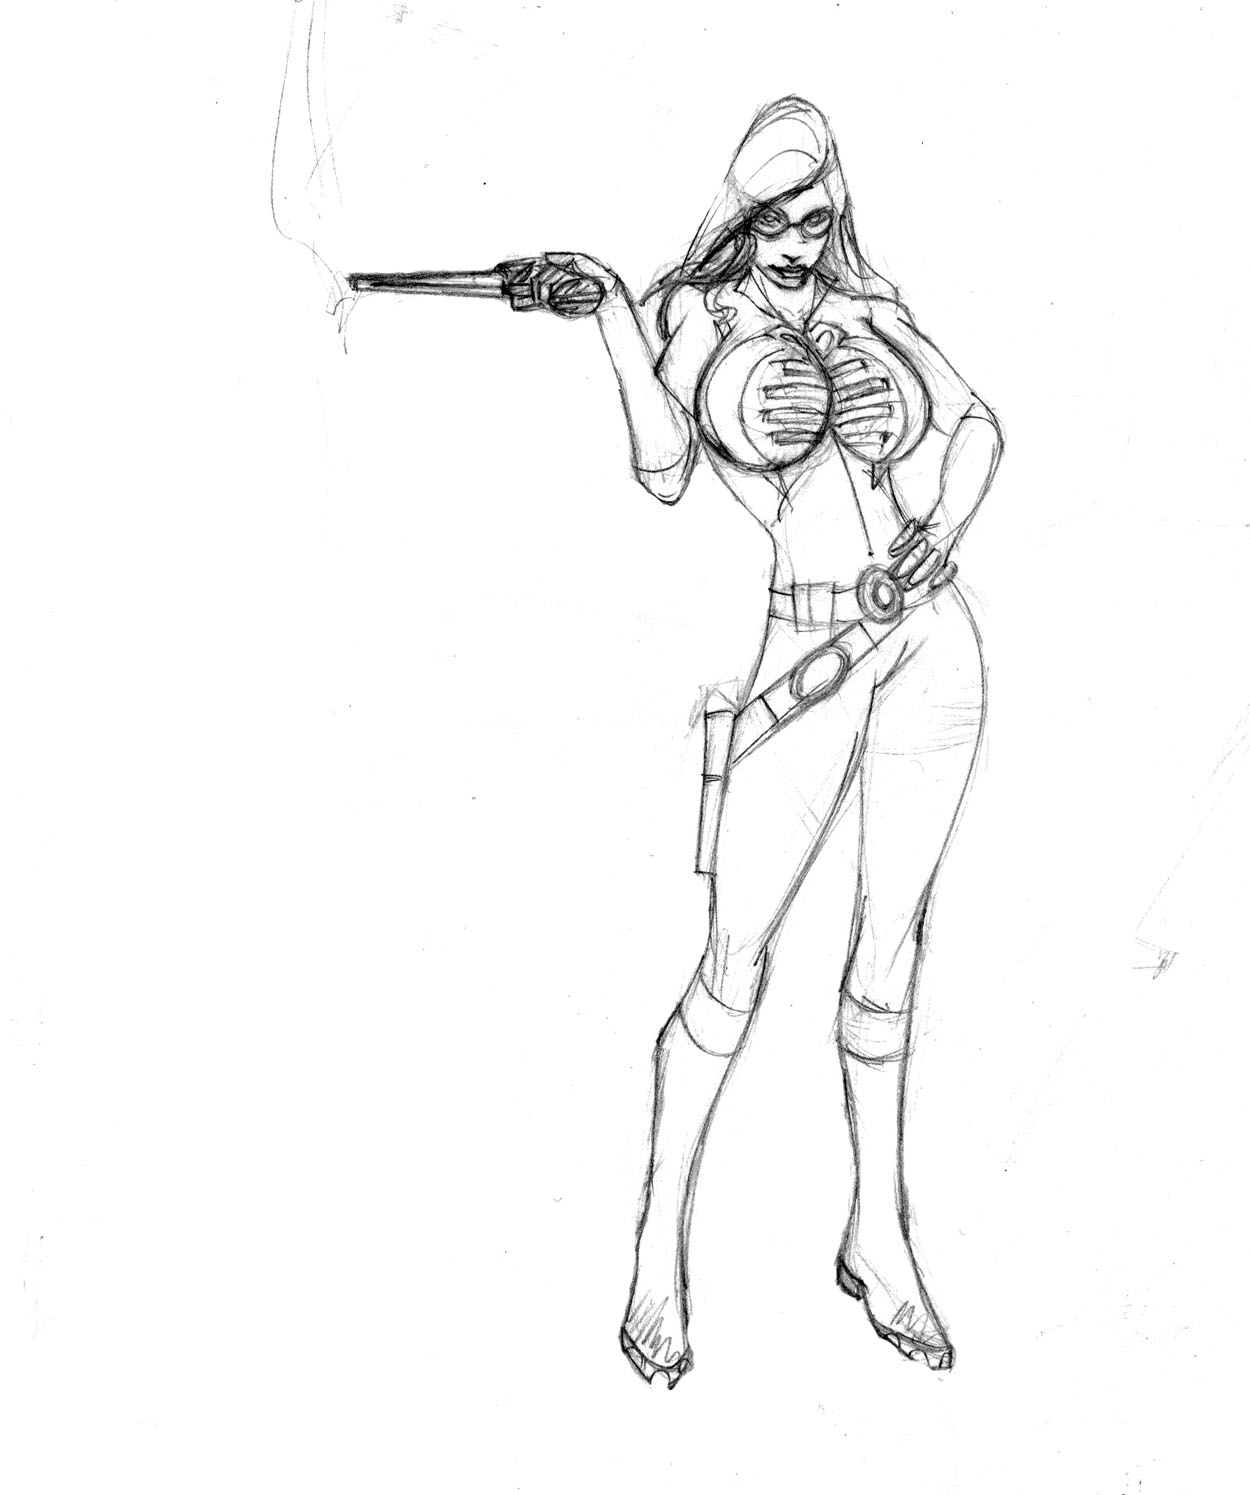 baroness with revolver by Selkirk